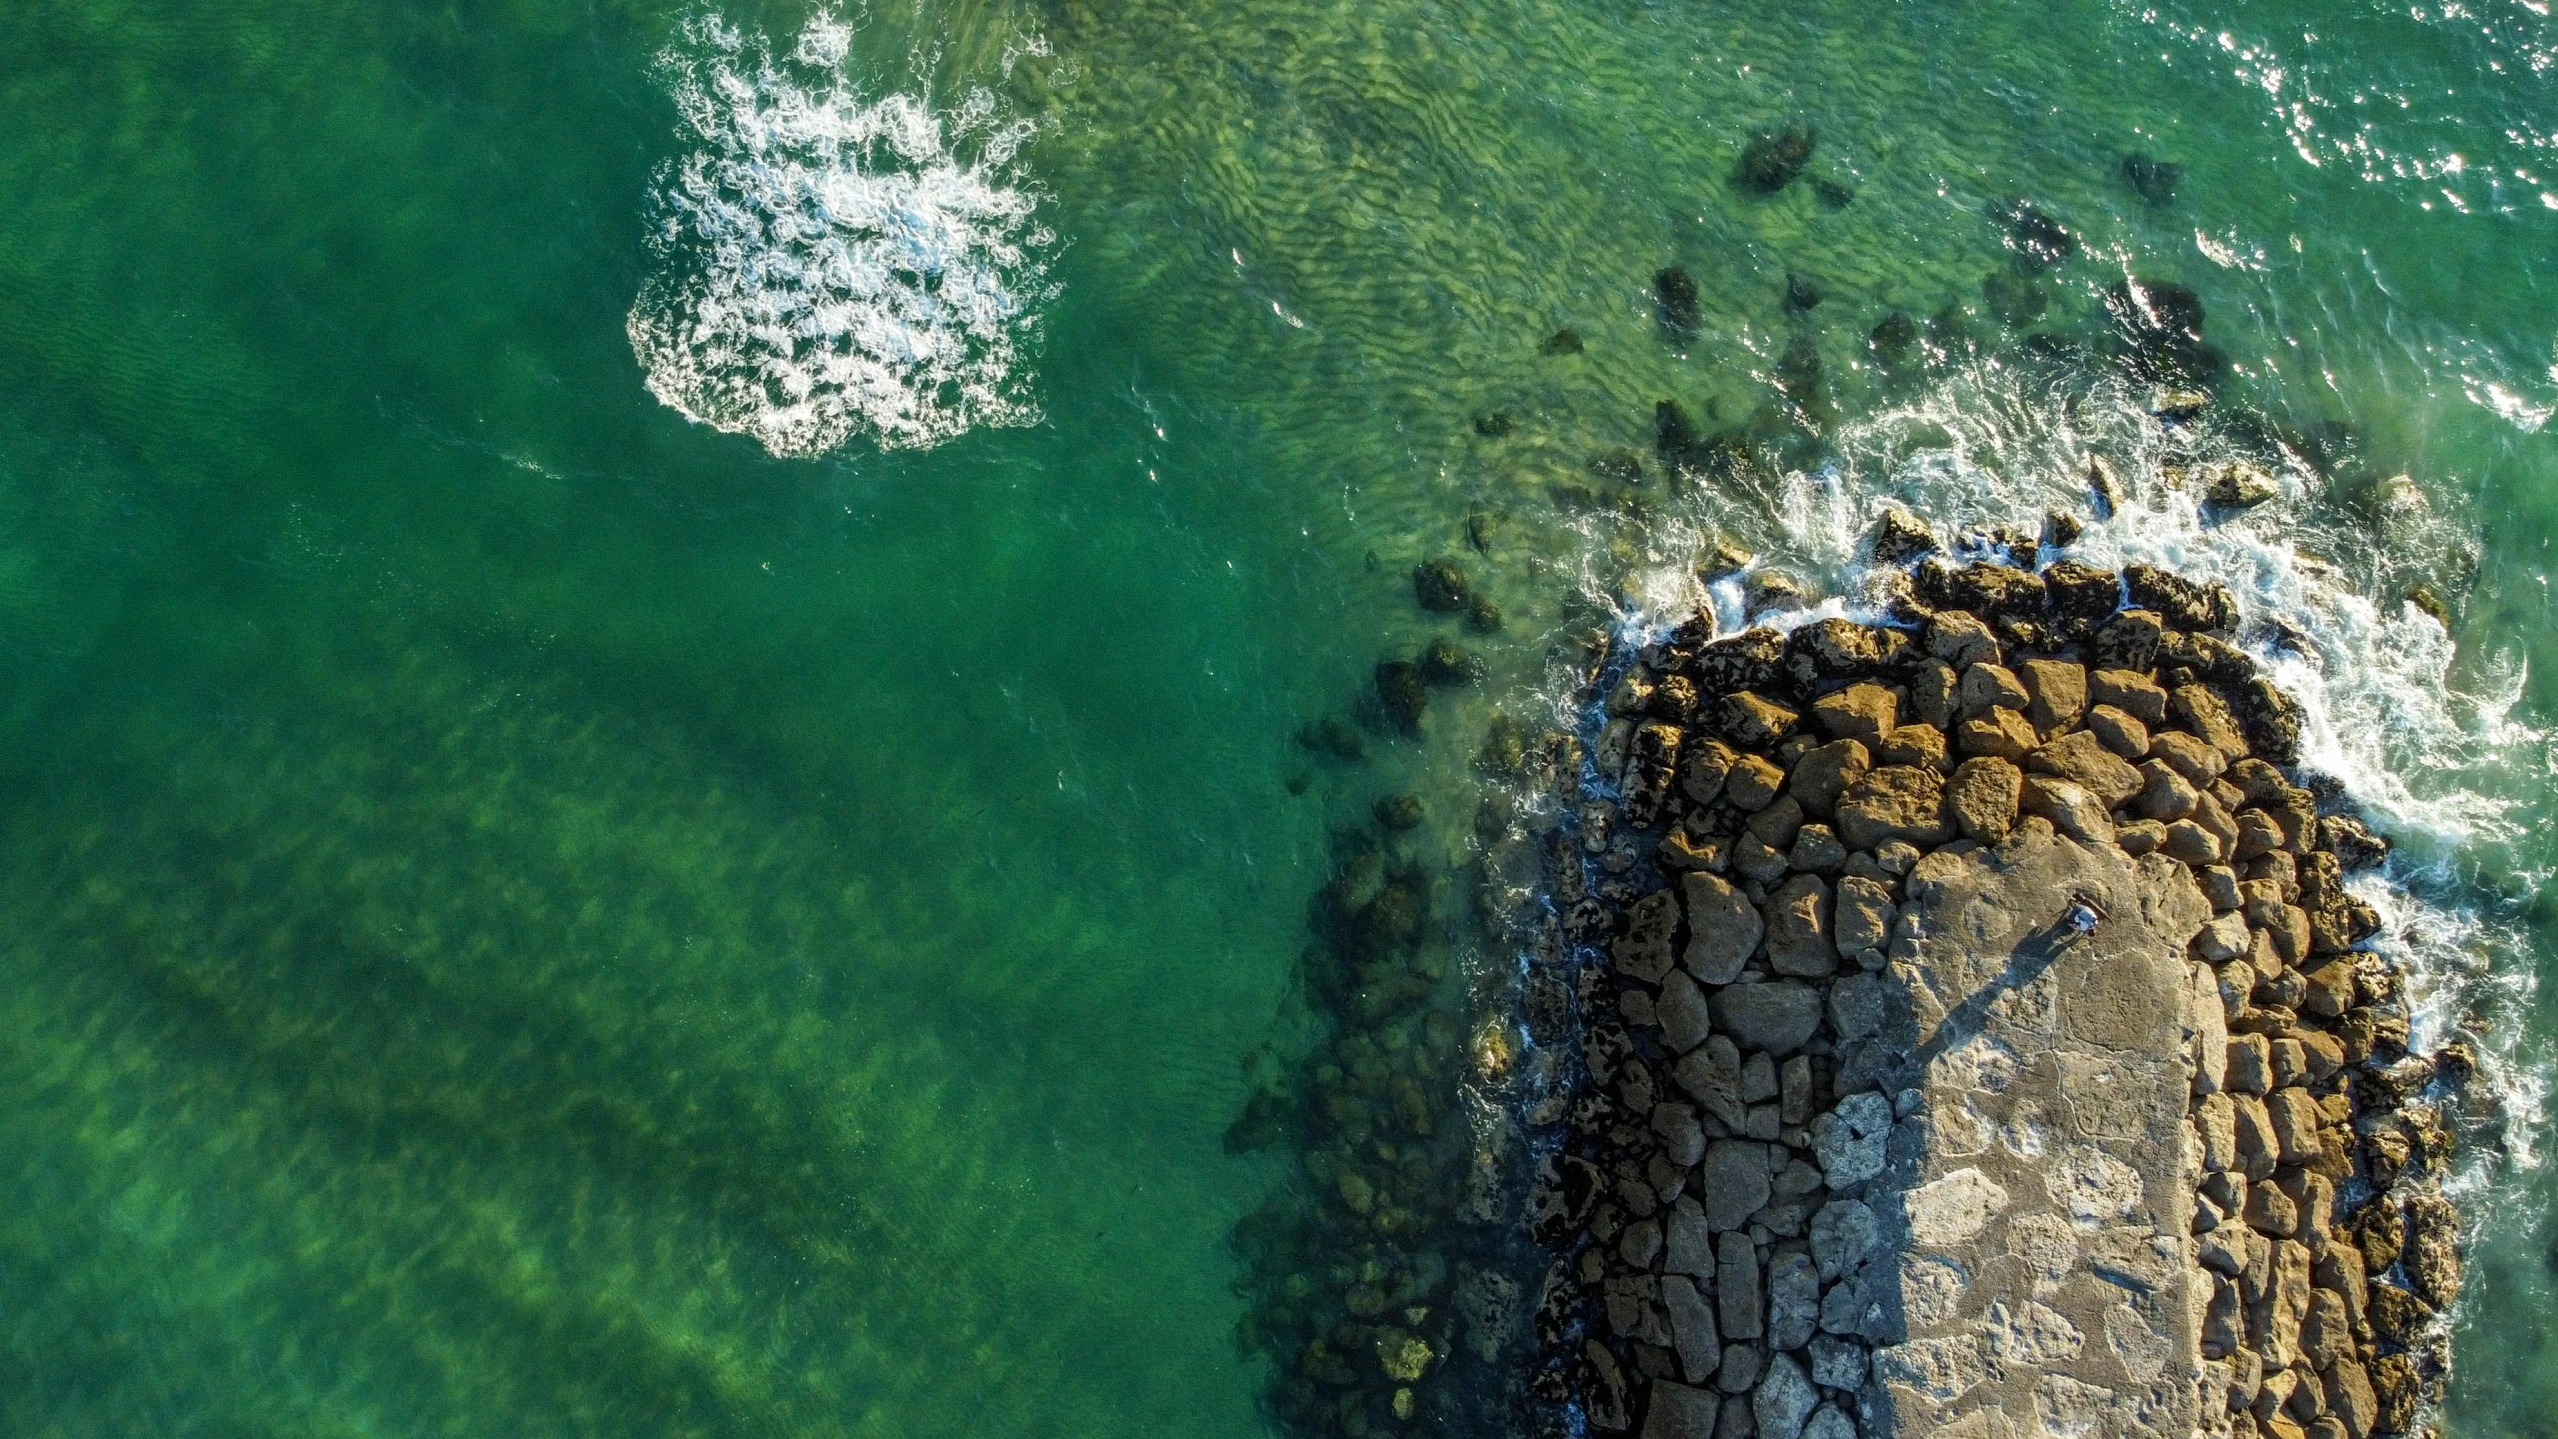 an aerial view of a large body of water, pexels contest winner, emeralds, near a jetty, rock pools, super high resolution